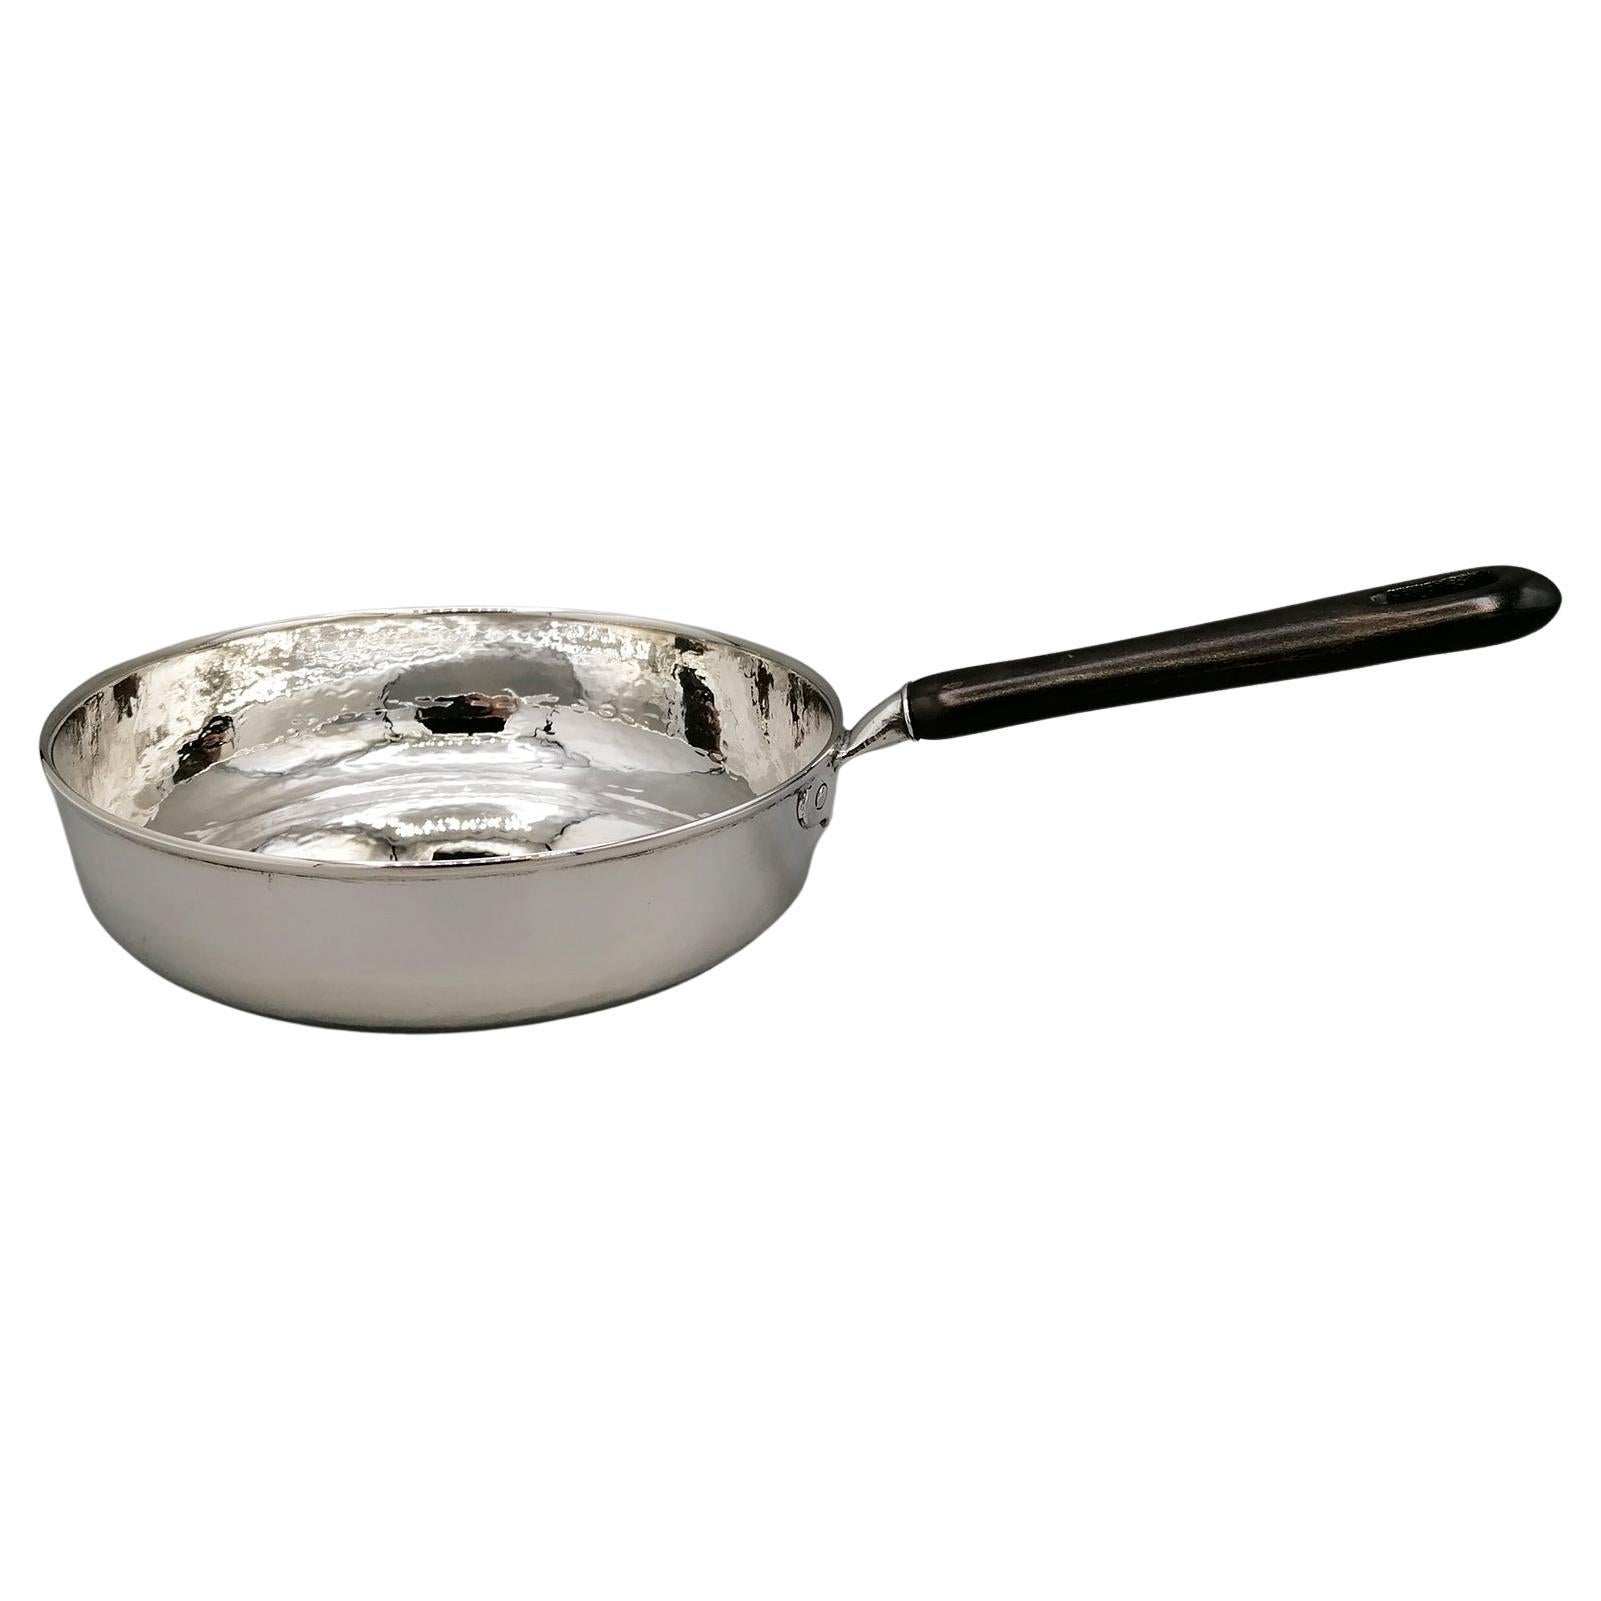 21st Century Italian Solid 800/1000 Silver Bowl  "Pan" with Woodden Handle For Sale